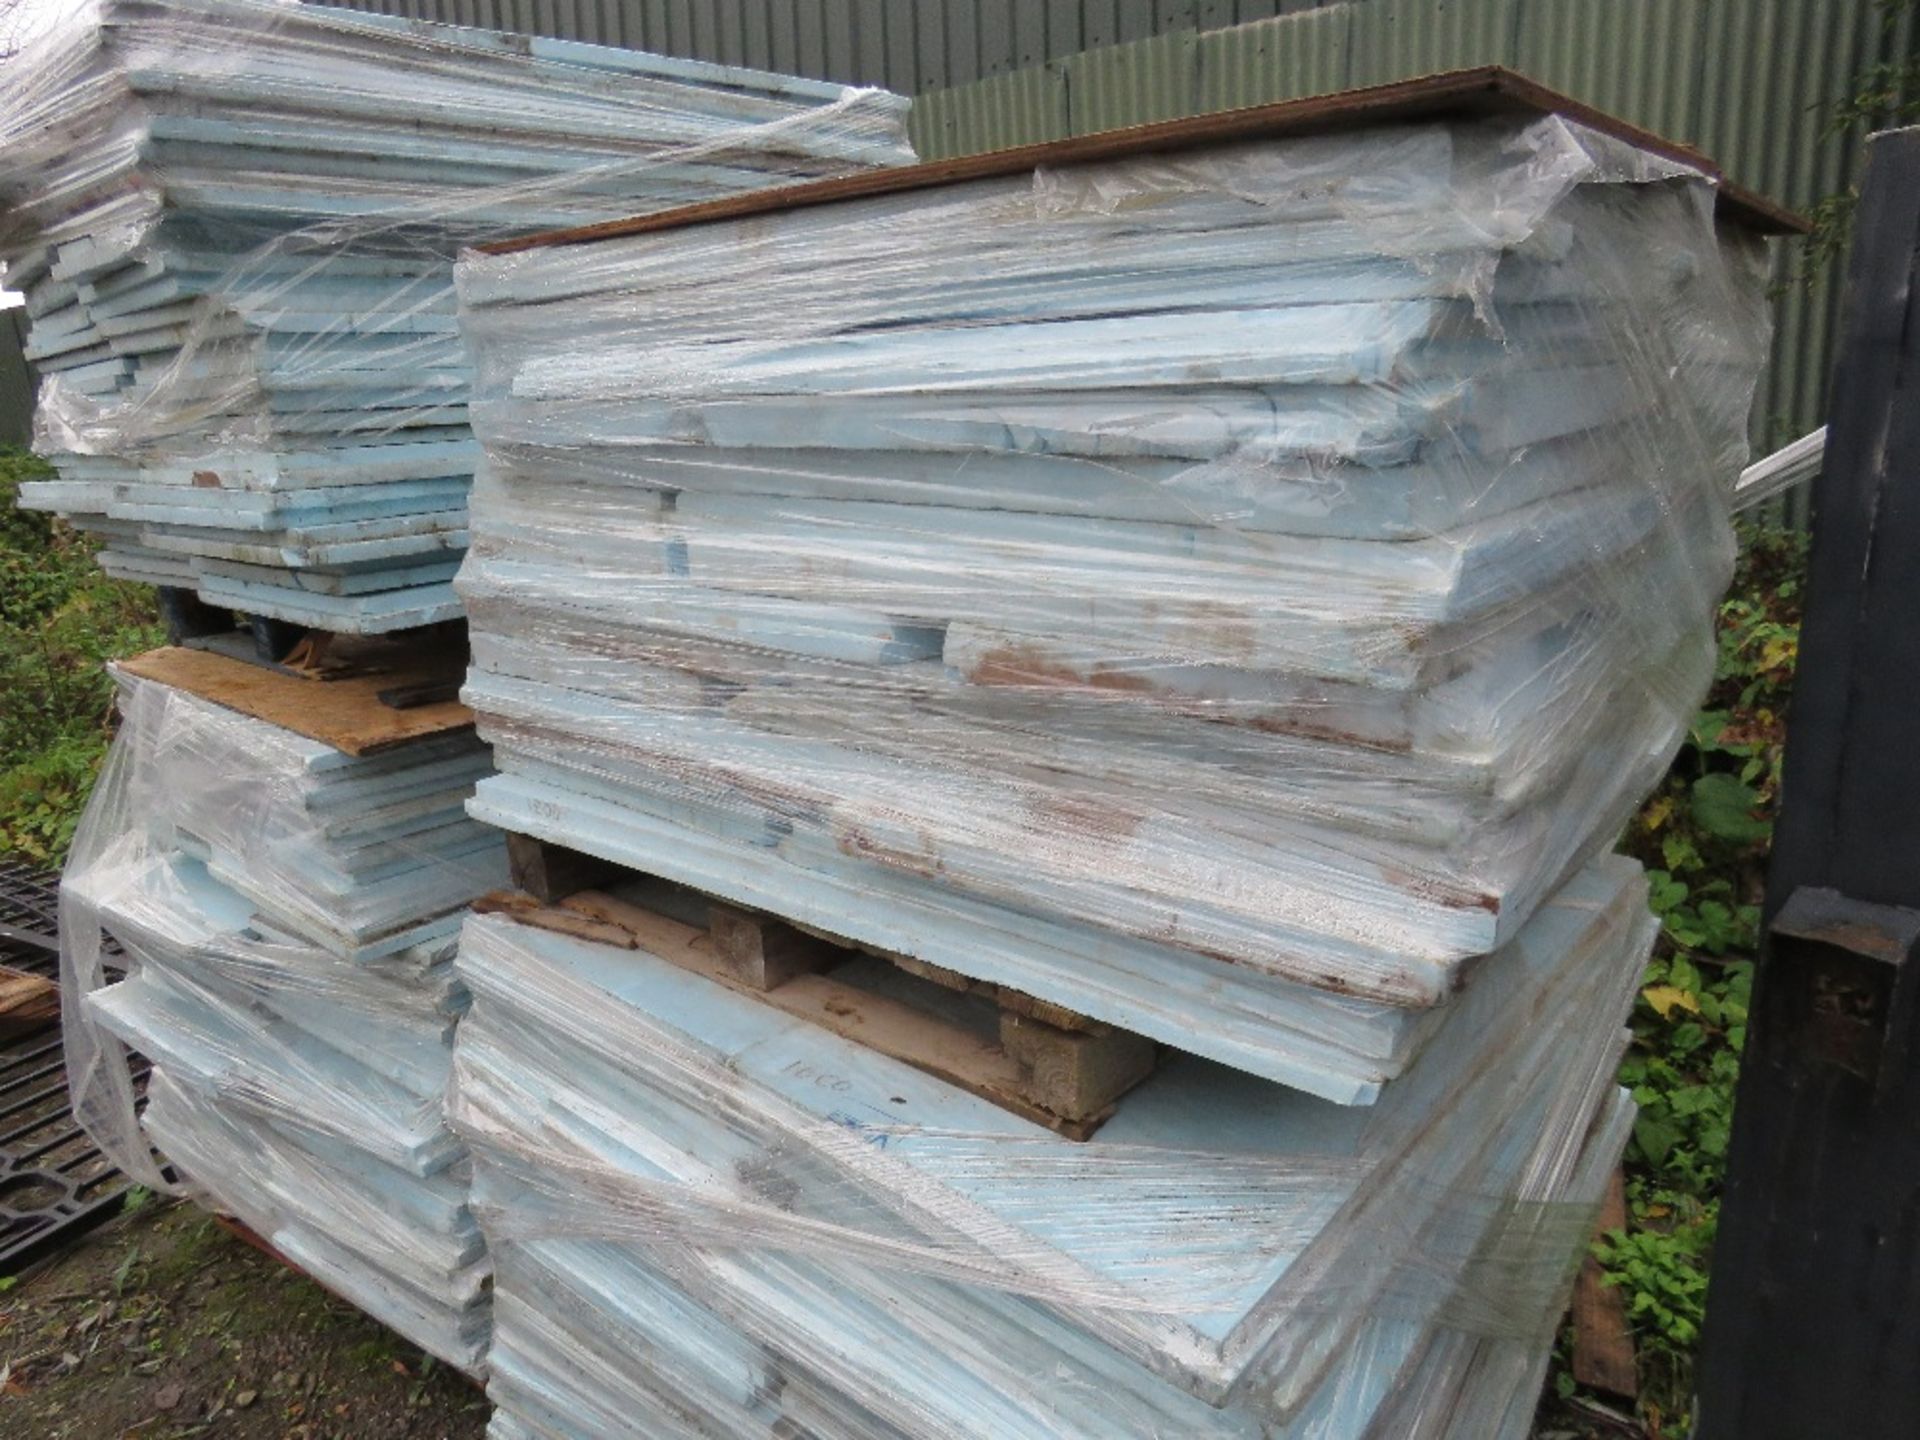 4 X PALLETS OF INSULATION MATERIAL/CLAY HEAVE EXPANSION SHEETS. - Image 2 of 2